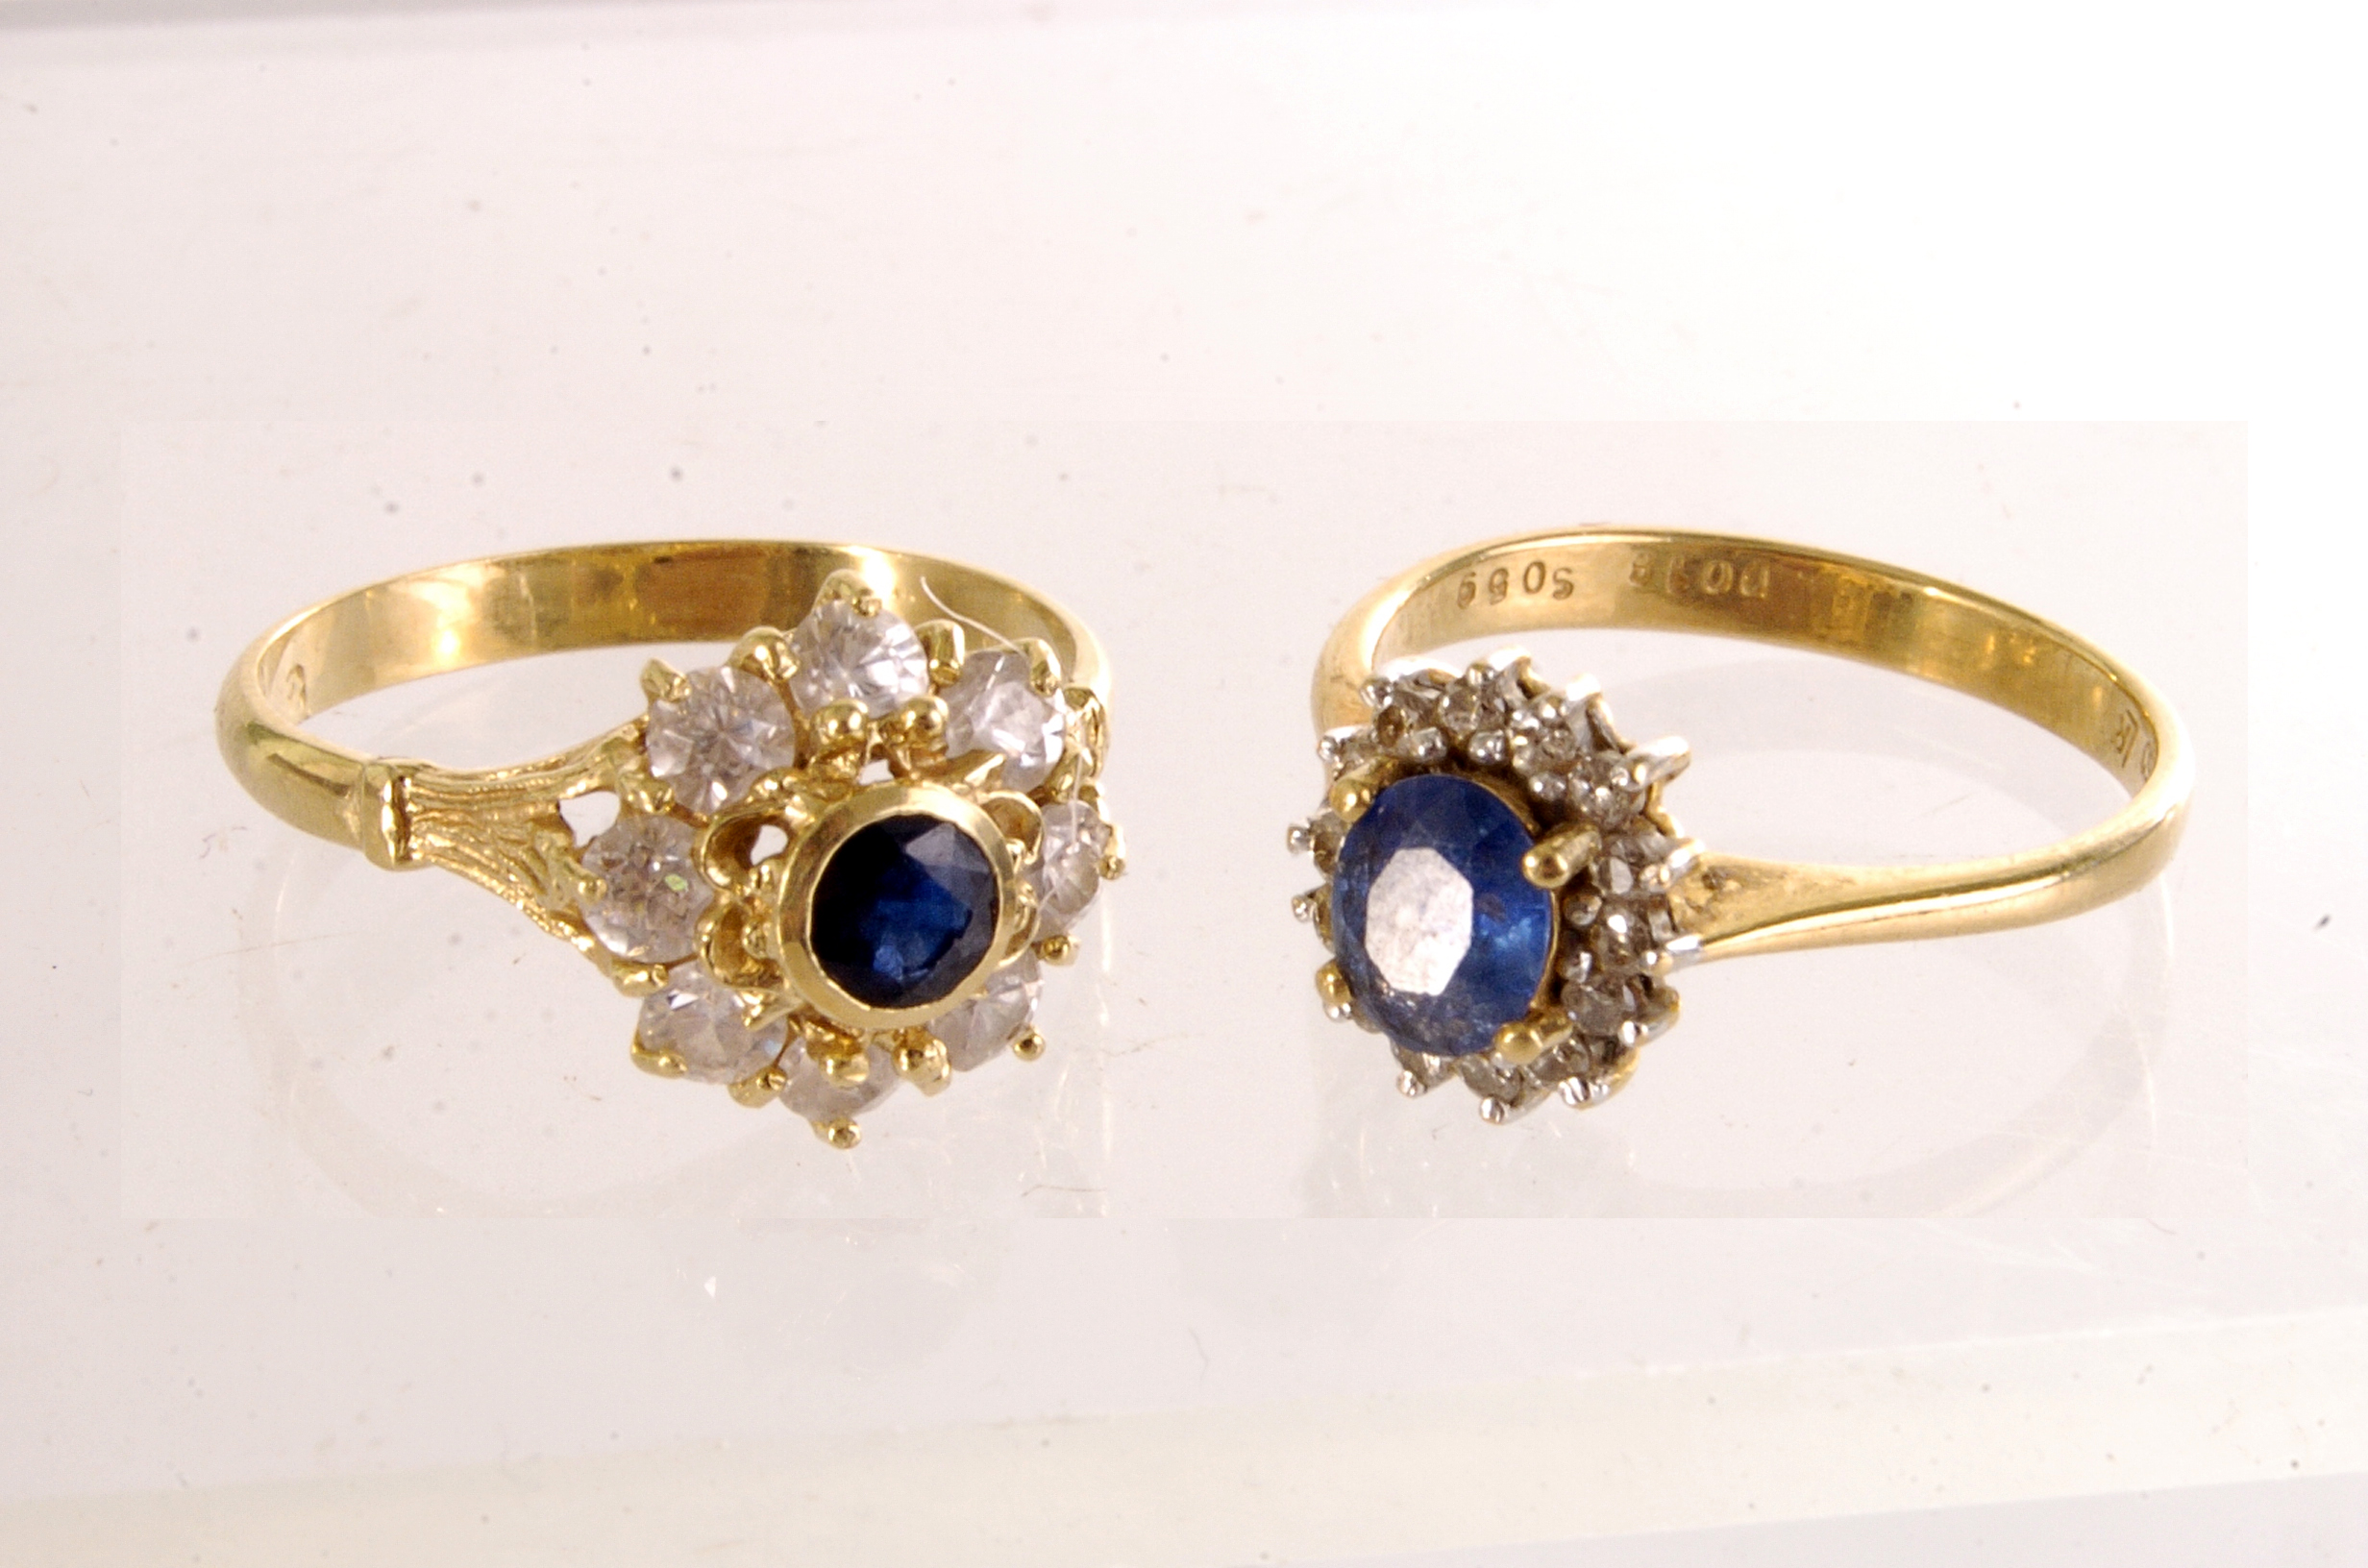 Two yellow metal and gem set cluster rings, both marked 750, with a central blue stone surrounded by